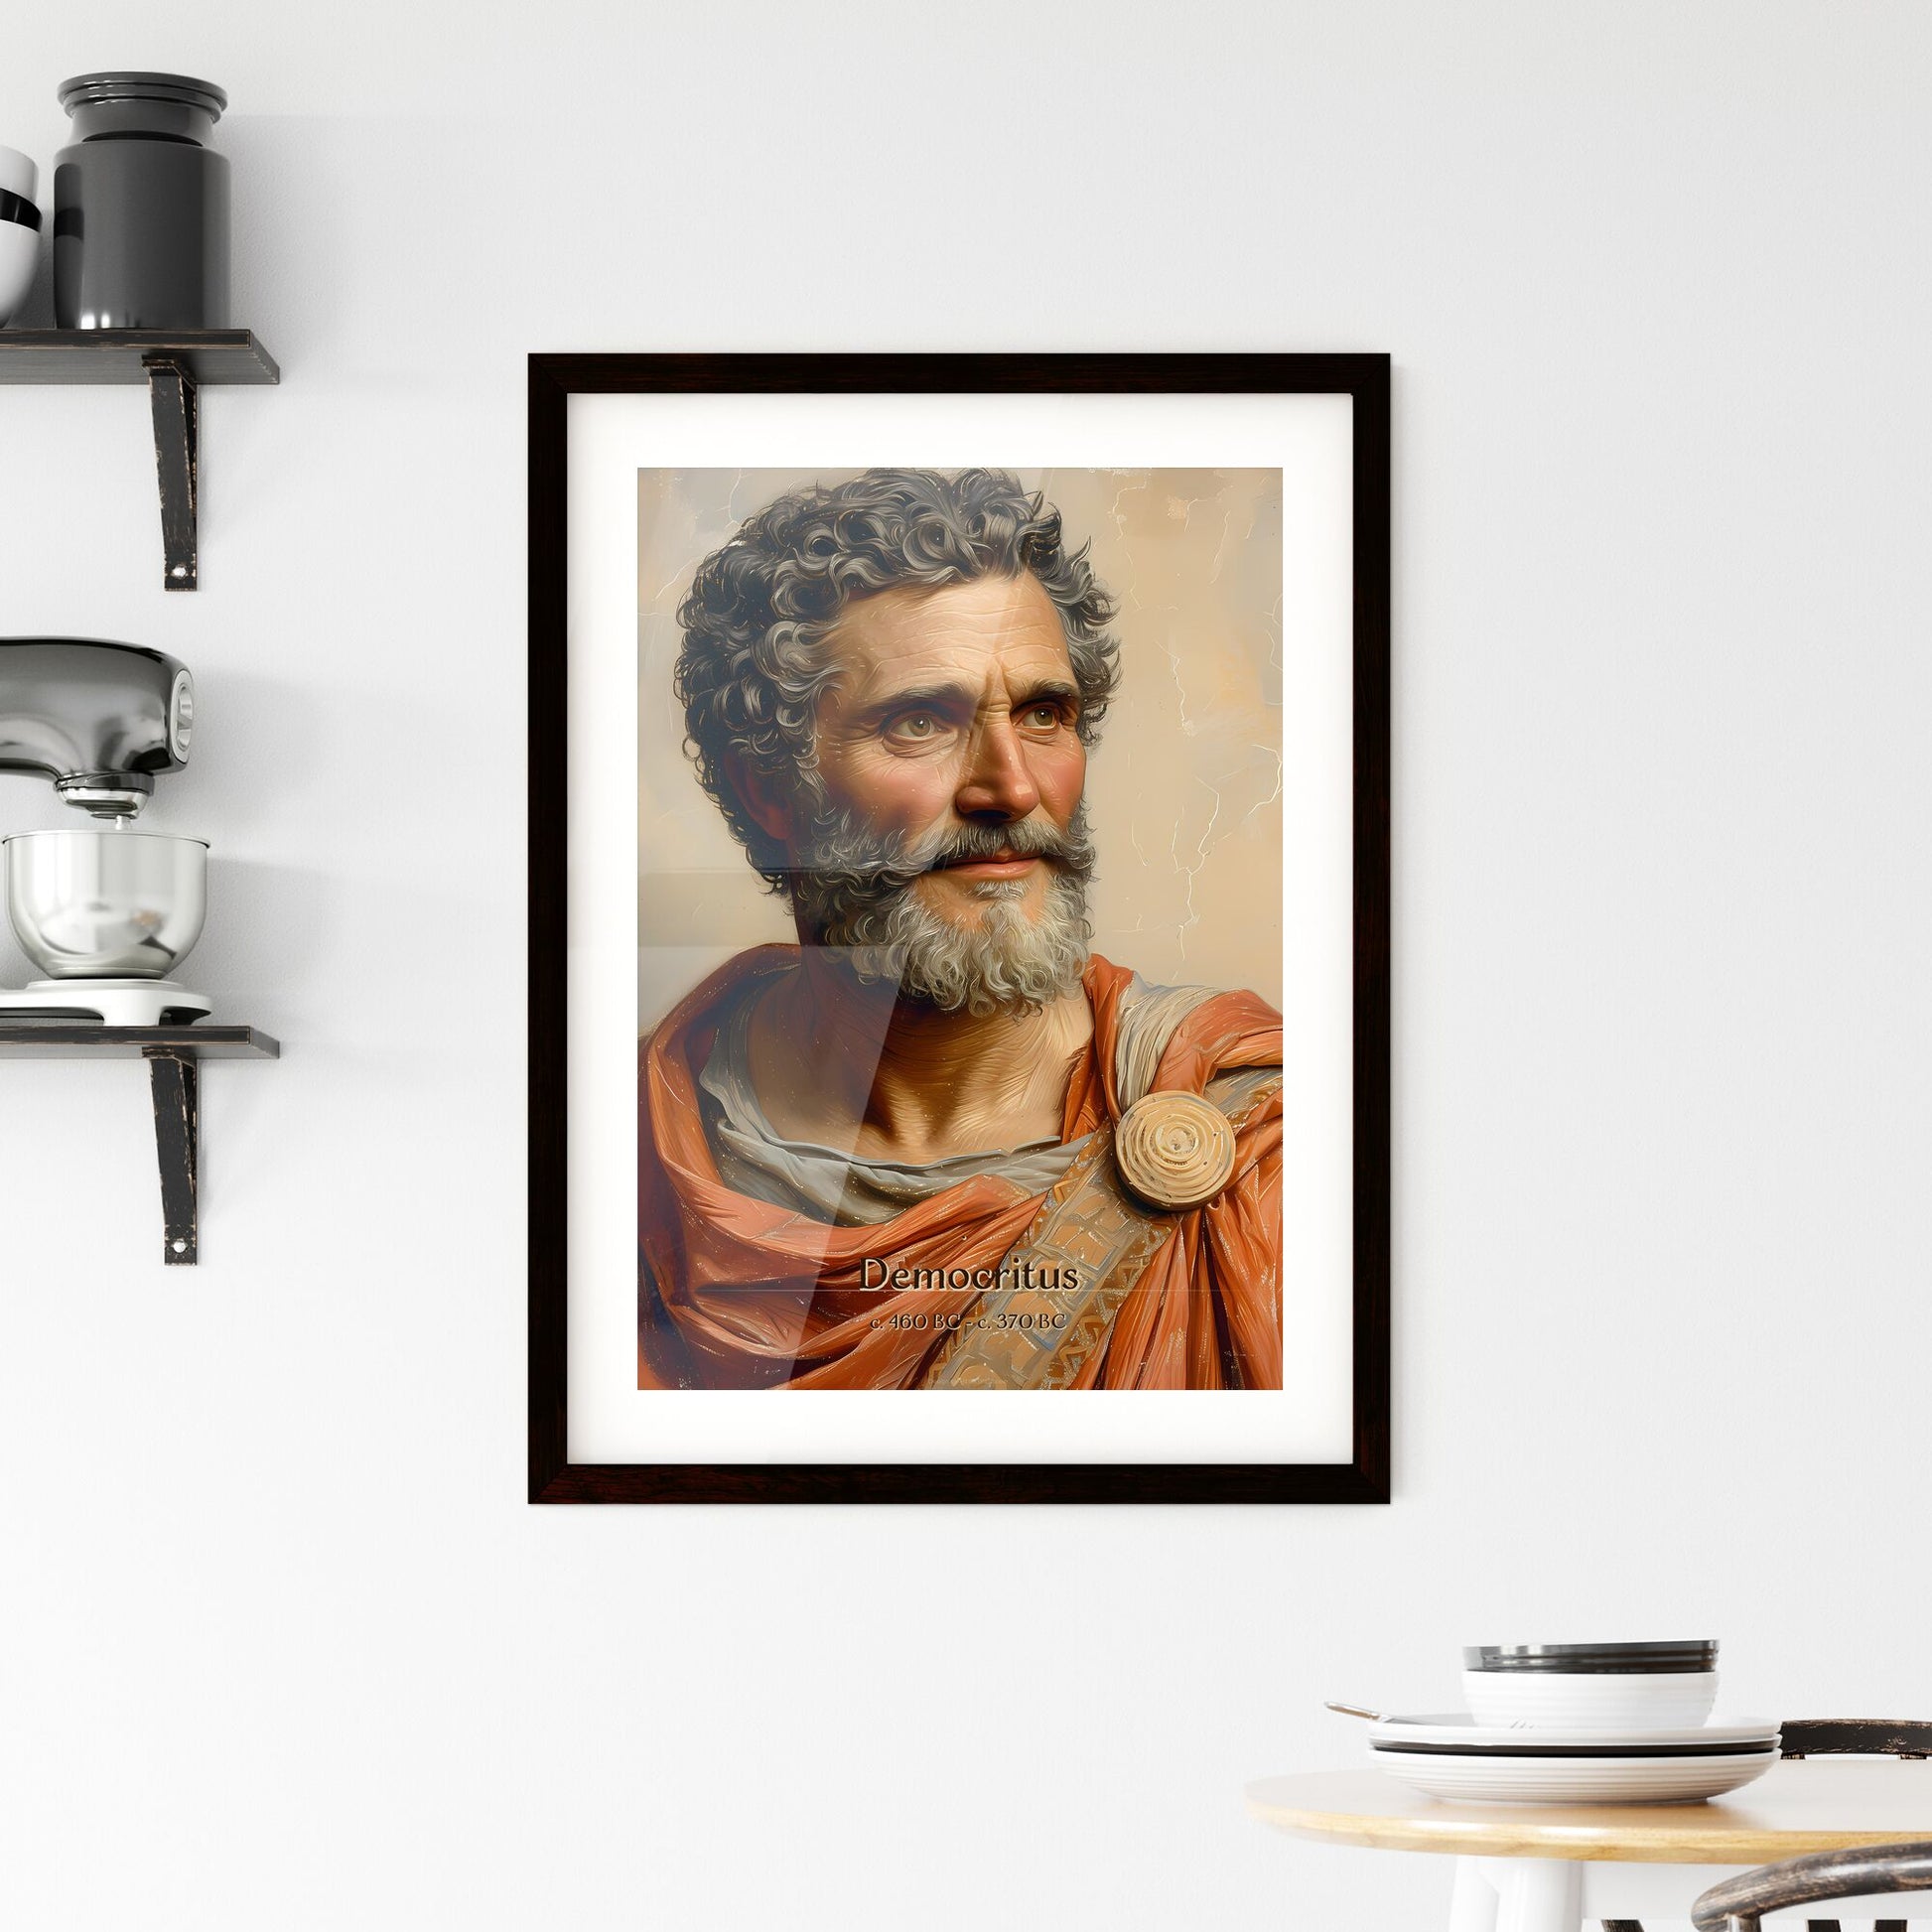 Democritus, c. 460 BC - c. 370 BC, A Poster of a painting of a man wearing a robe Default Title